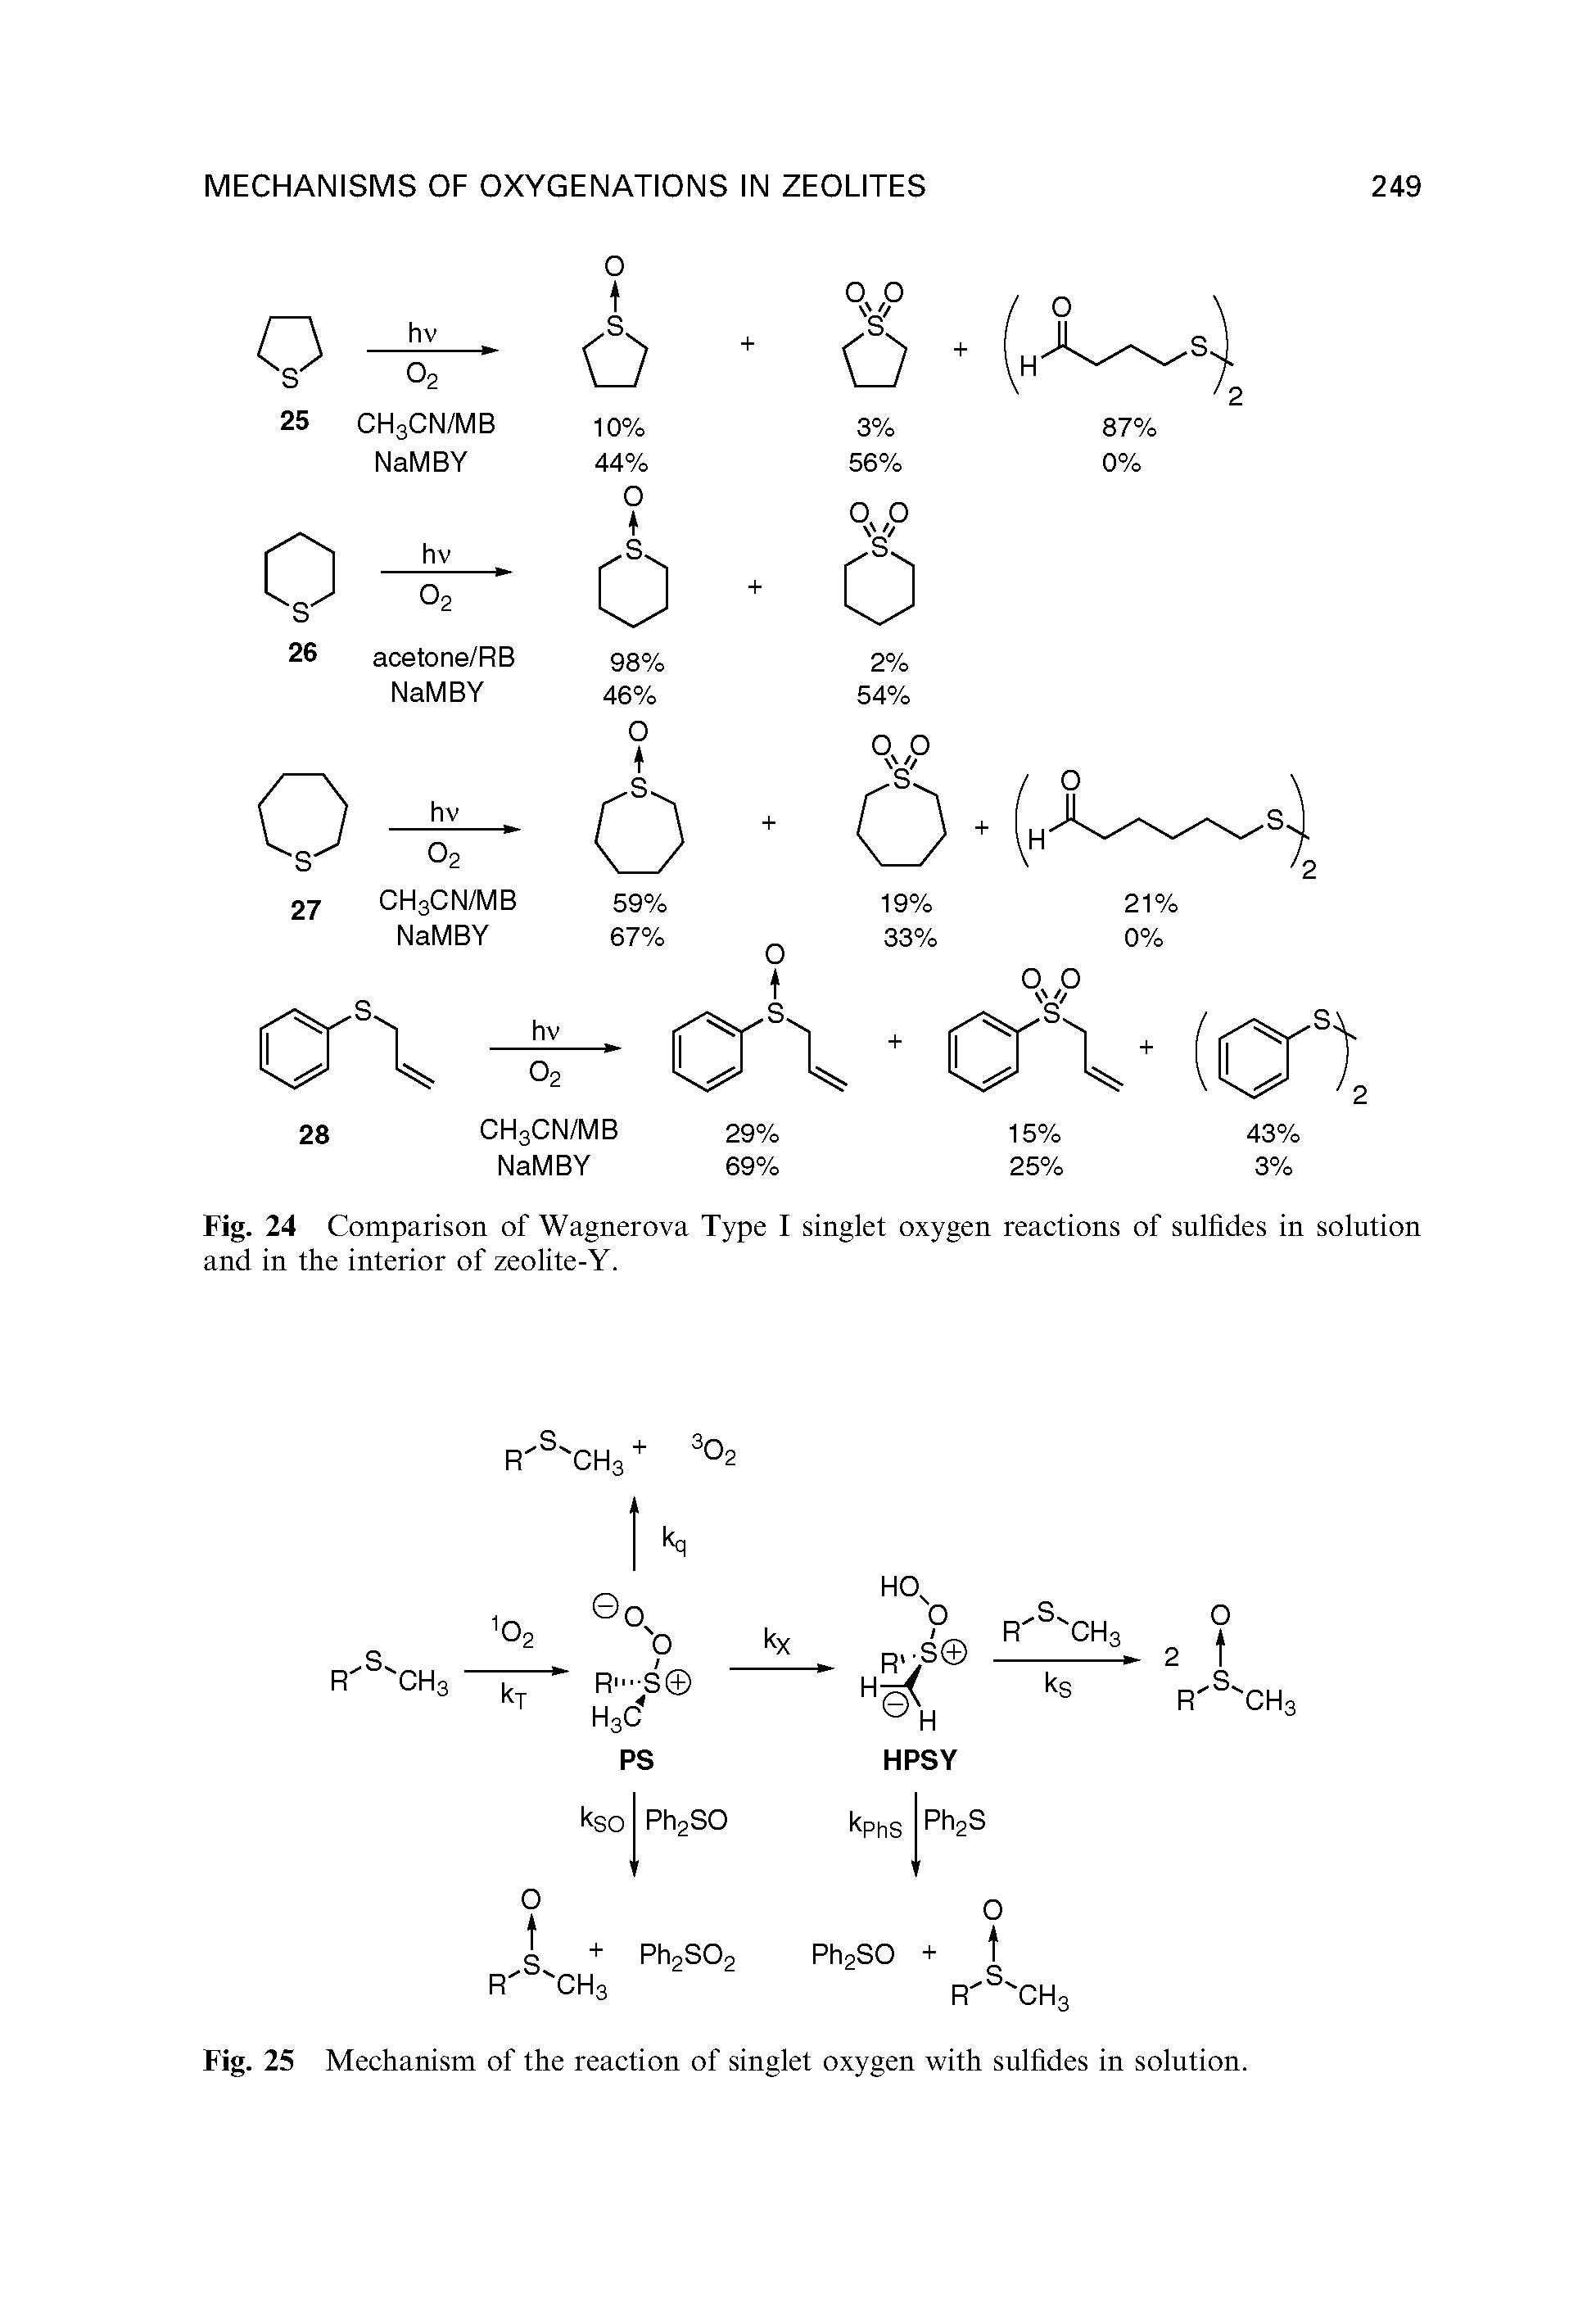 Fig. 25 Mechanism of the reaction of singlet oxygen with sulfides in solution.